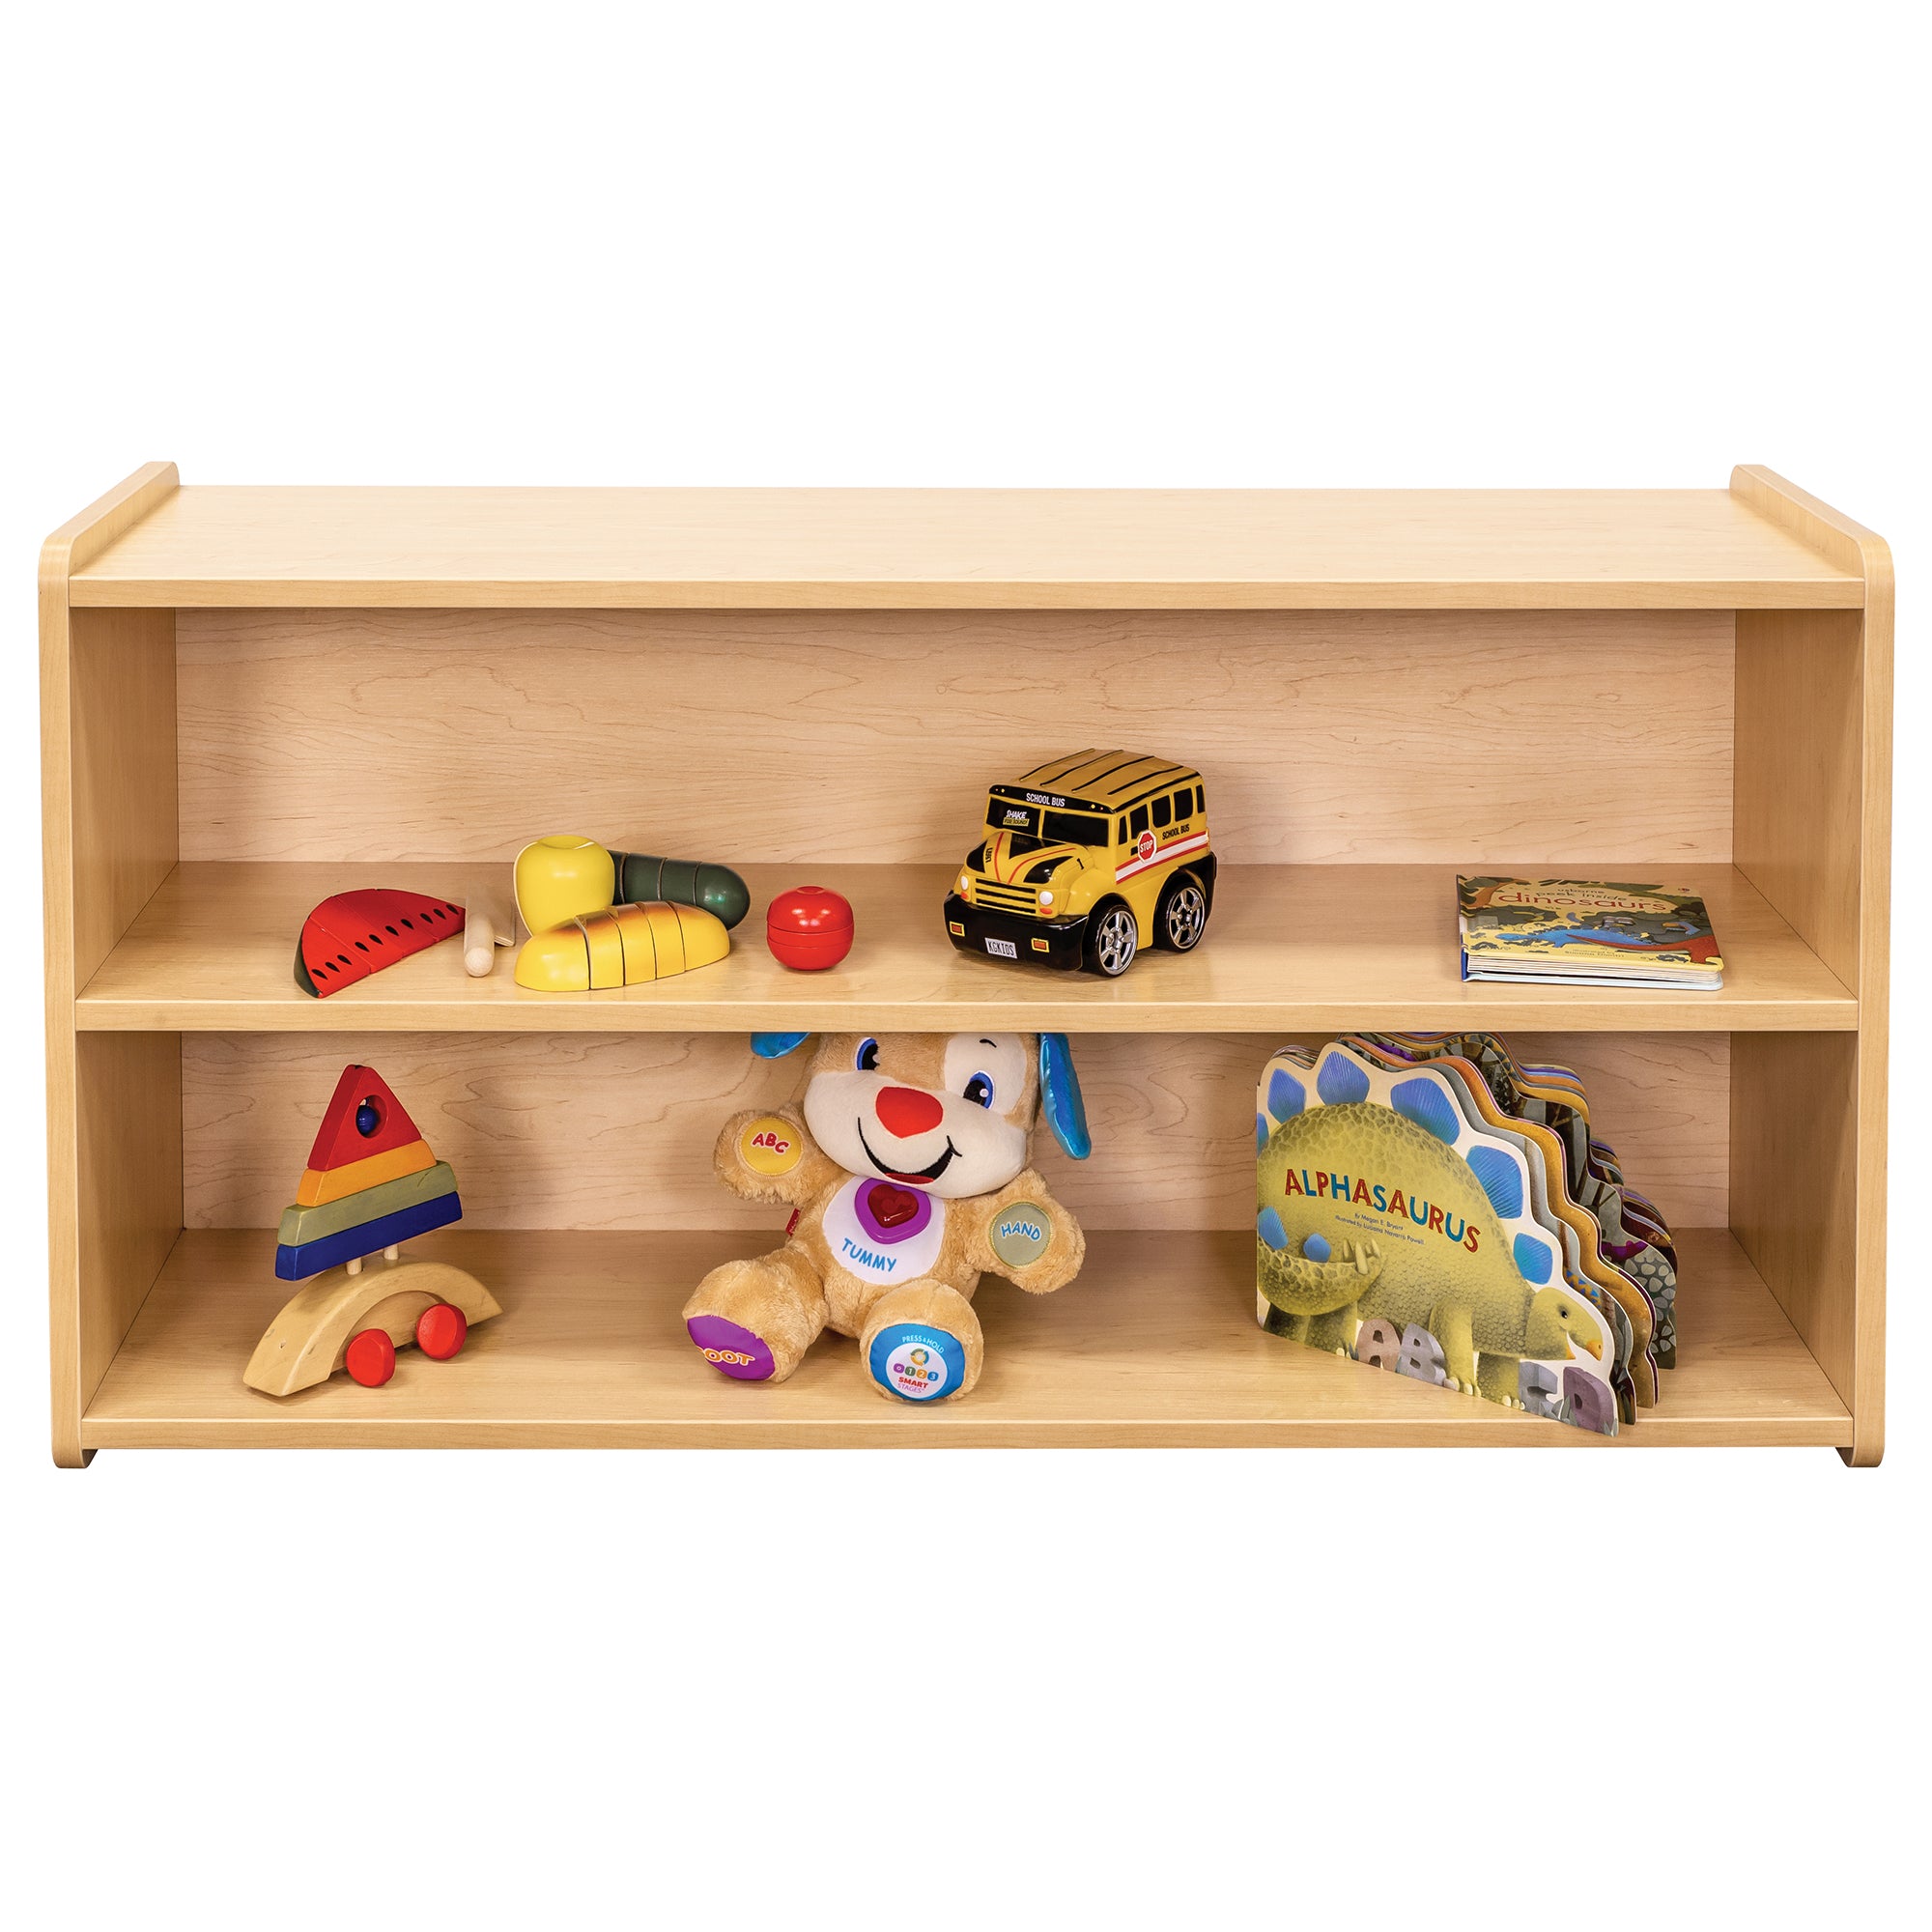 2-Shelf Storage Unit, 24H - Maple/Maple, Assembly Required by Tot Mate